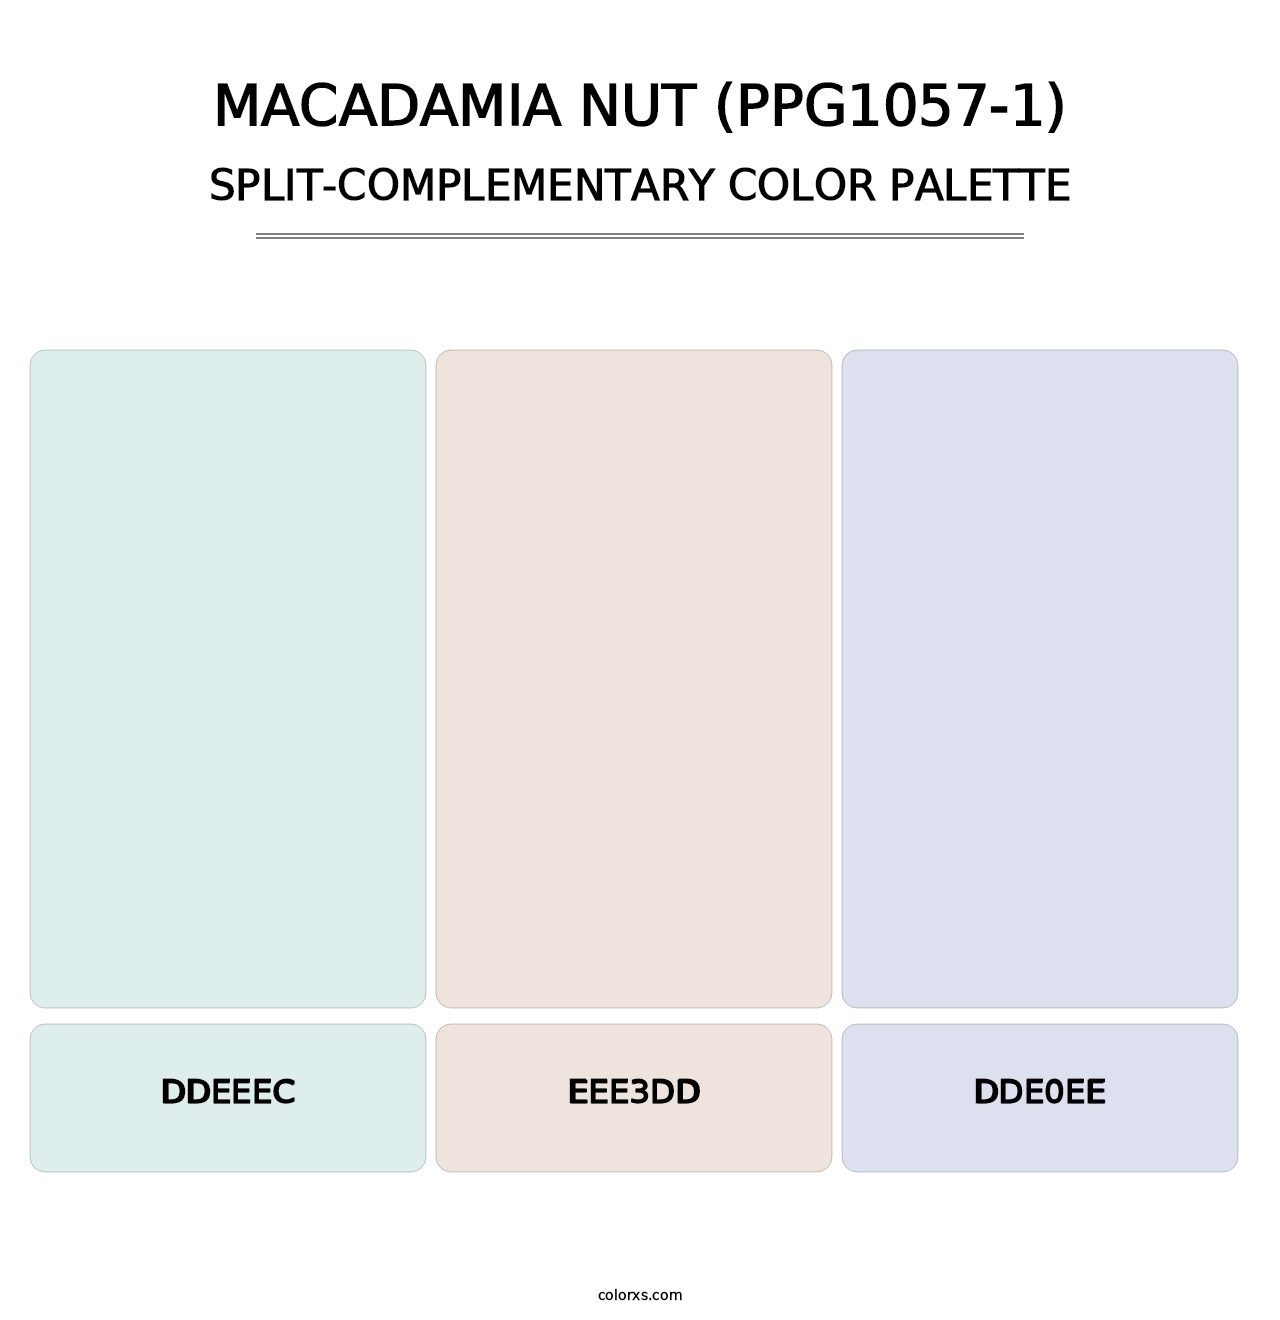 Macadamia Nut (PPG1057-1) - Split-Complementary Color Palette